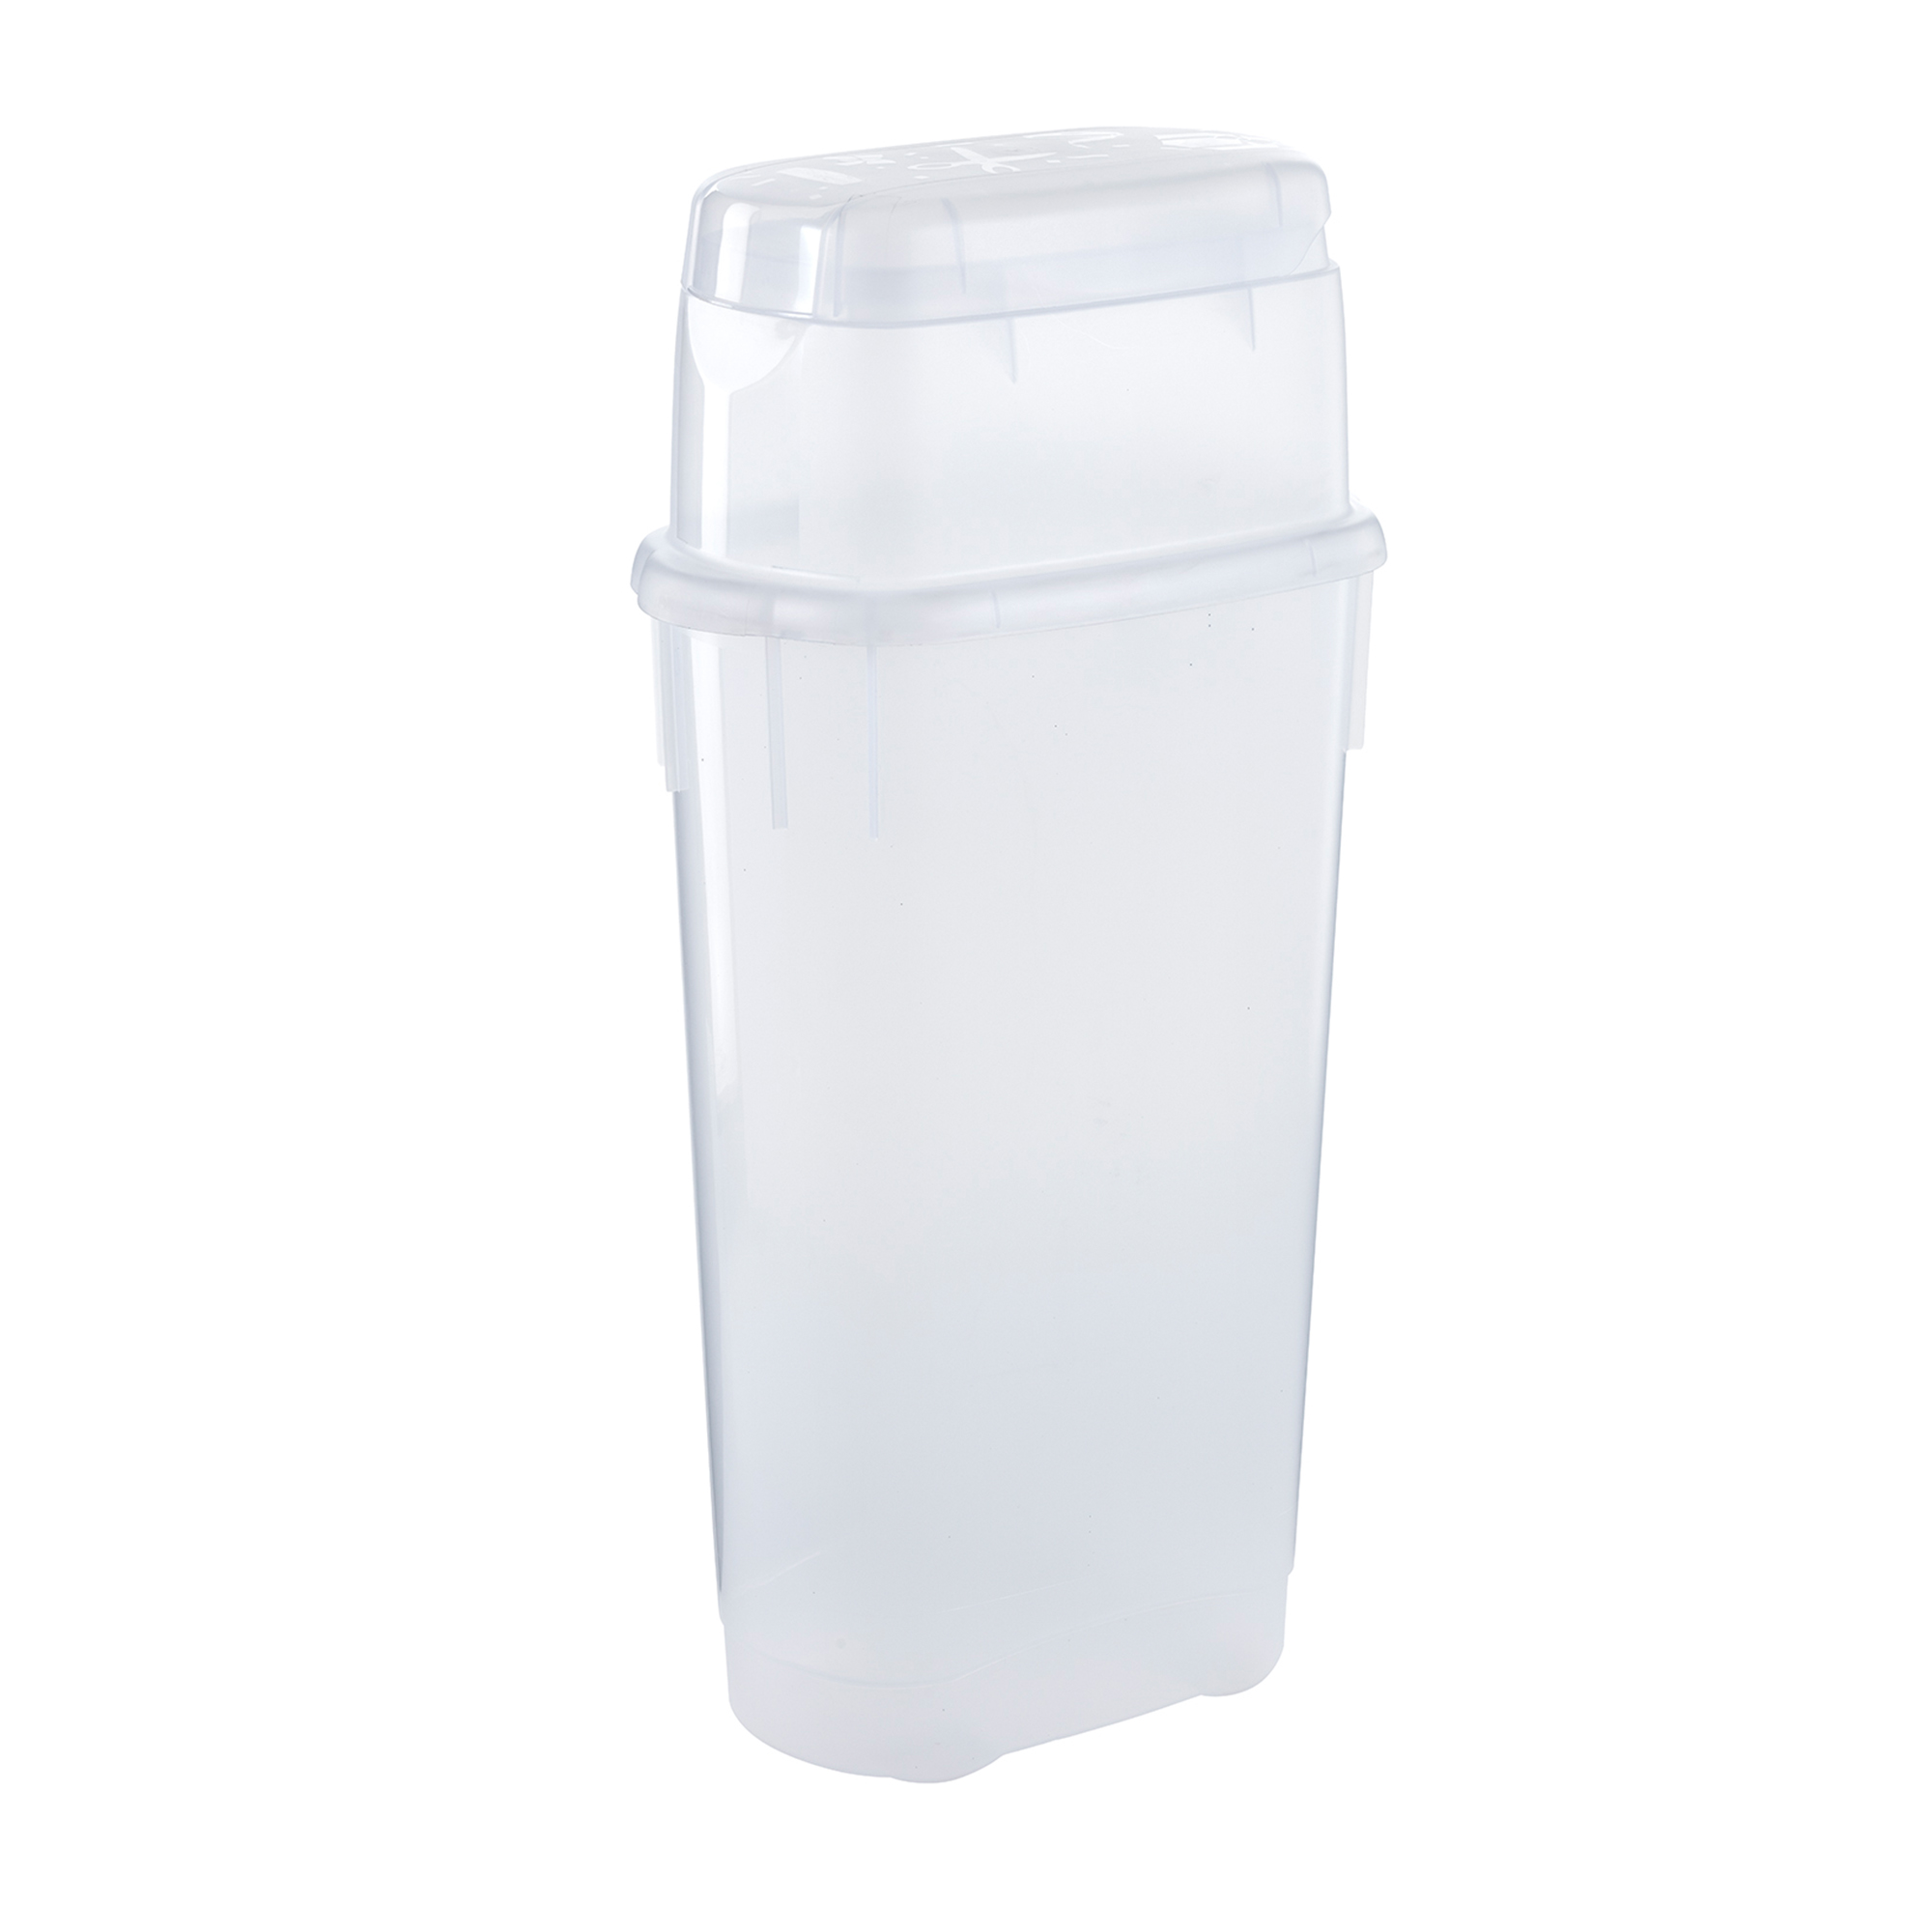 Rubbermaid Wrap N' Craft Plastic Wrapping Paper Container, Clear, Single